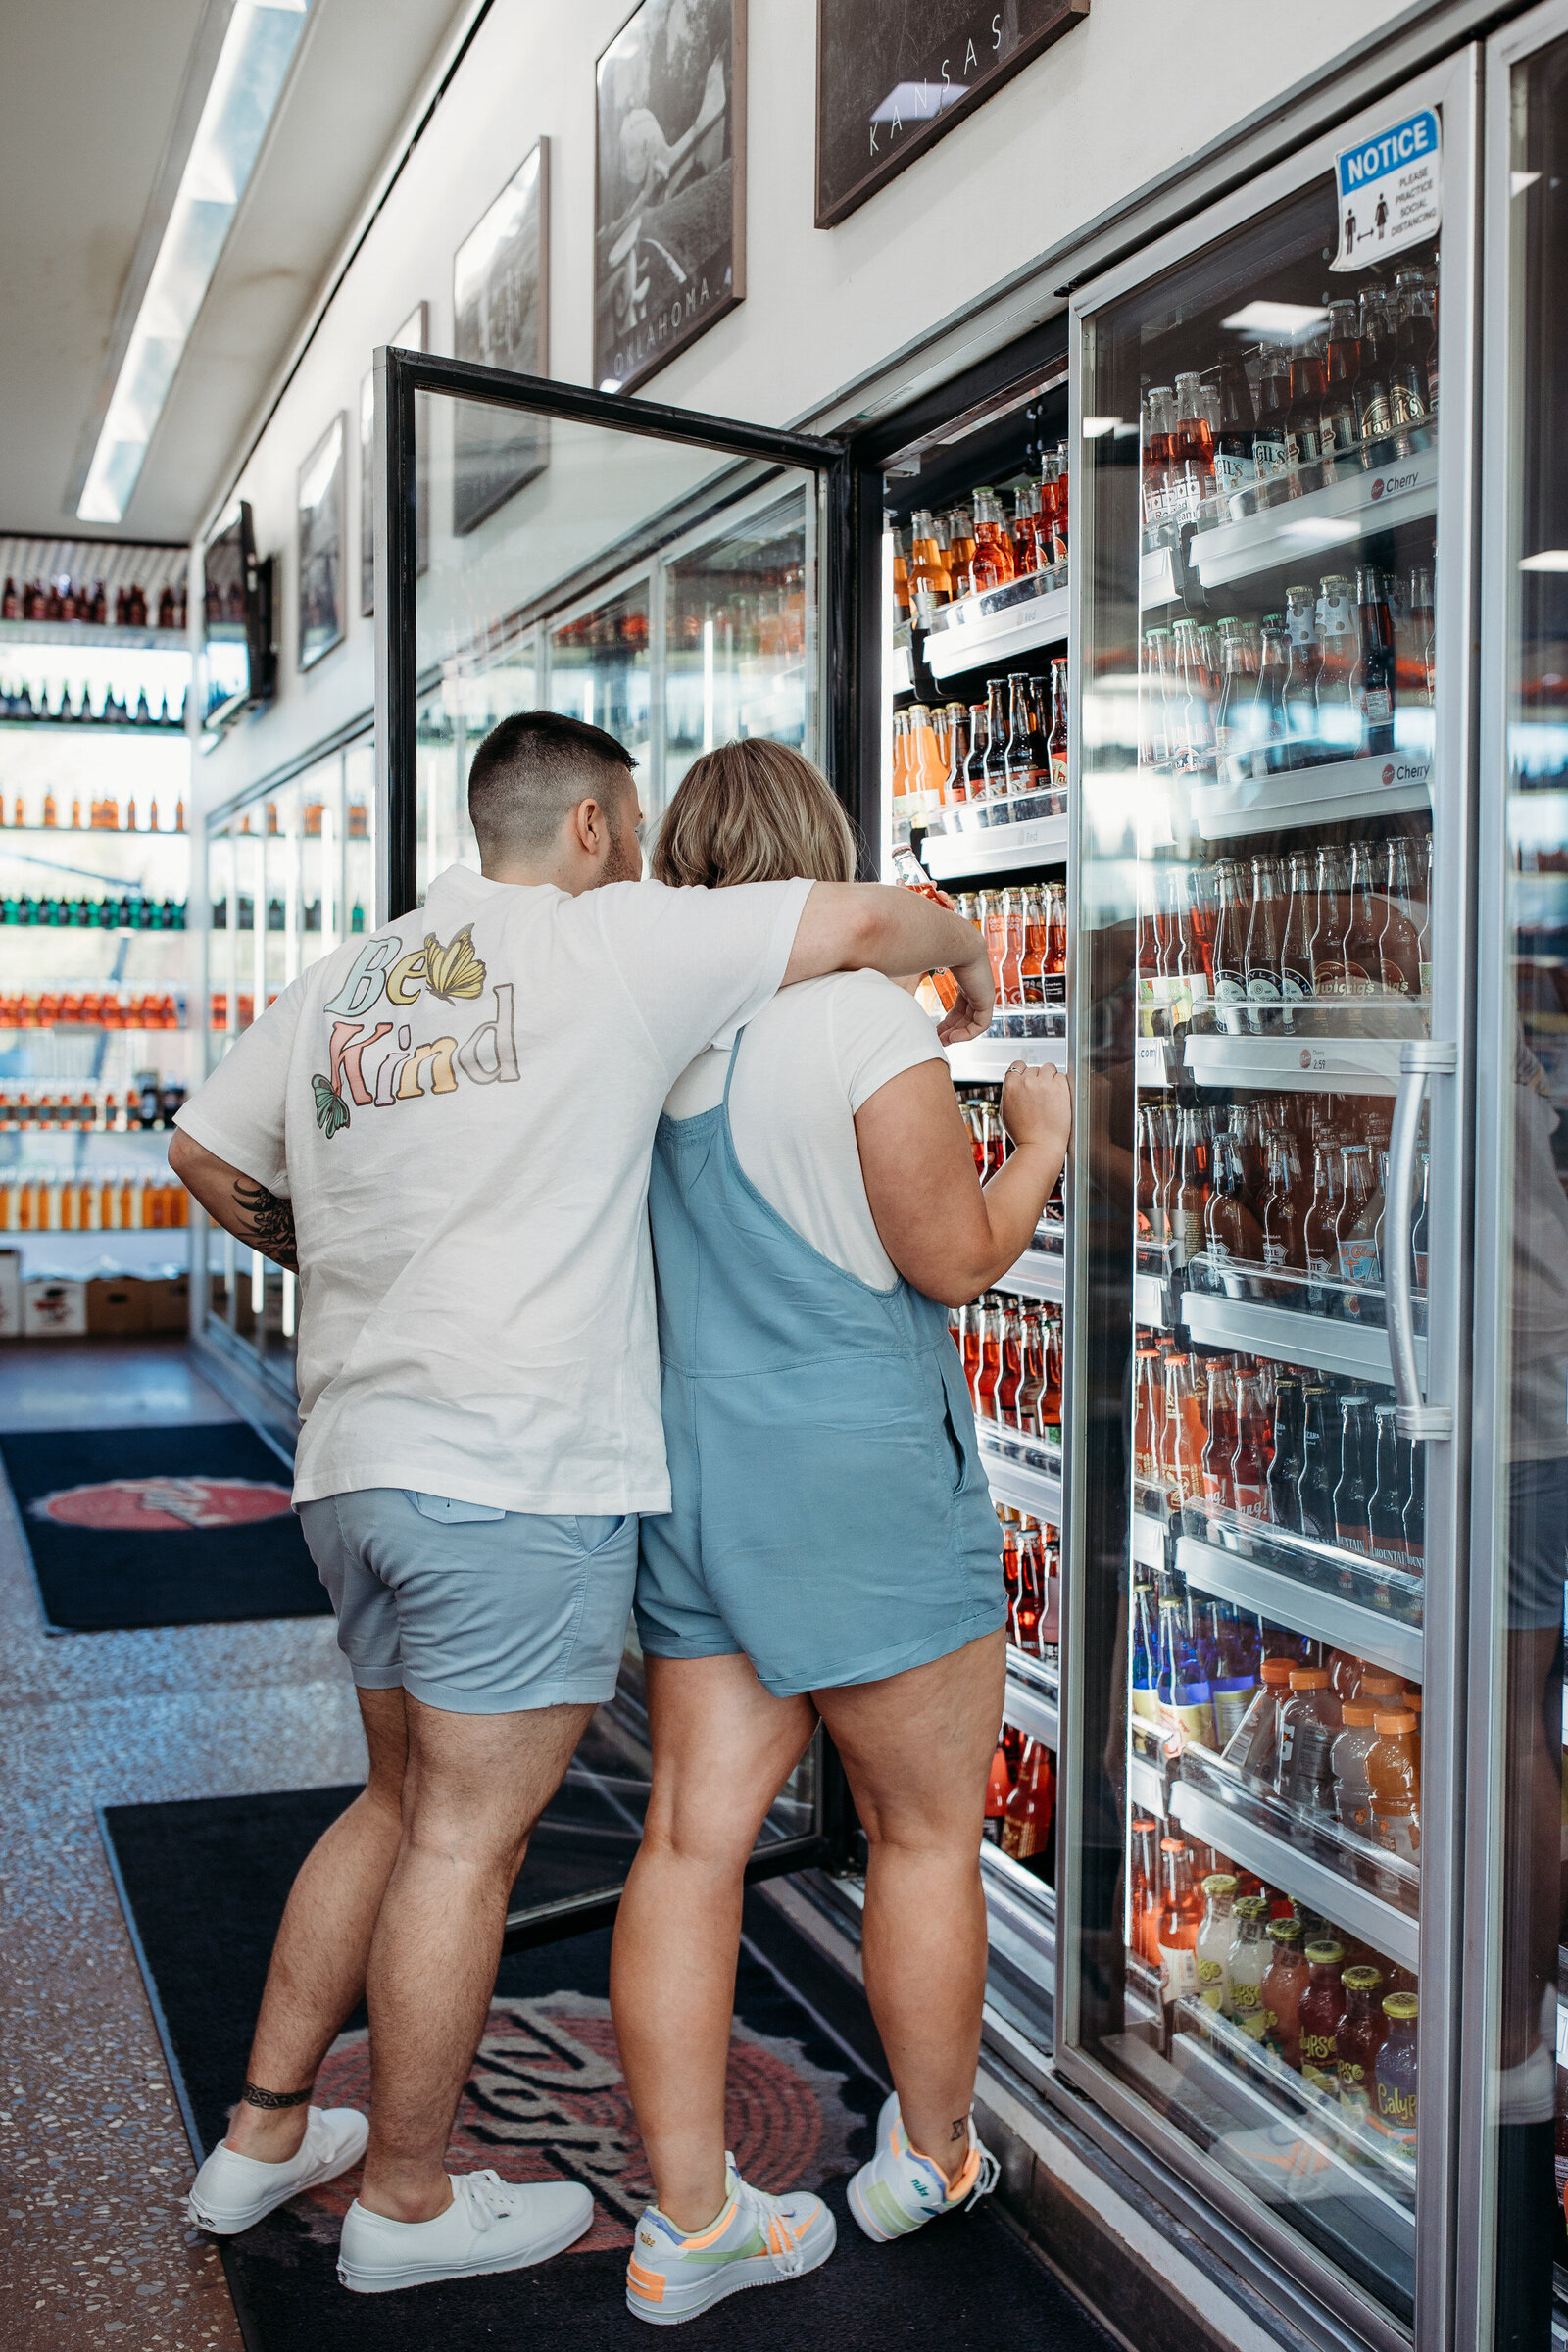 A couple in summer attire leans into a refrigerator filled with colorful beverages